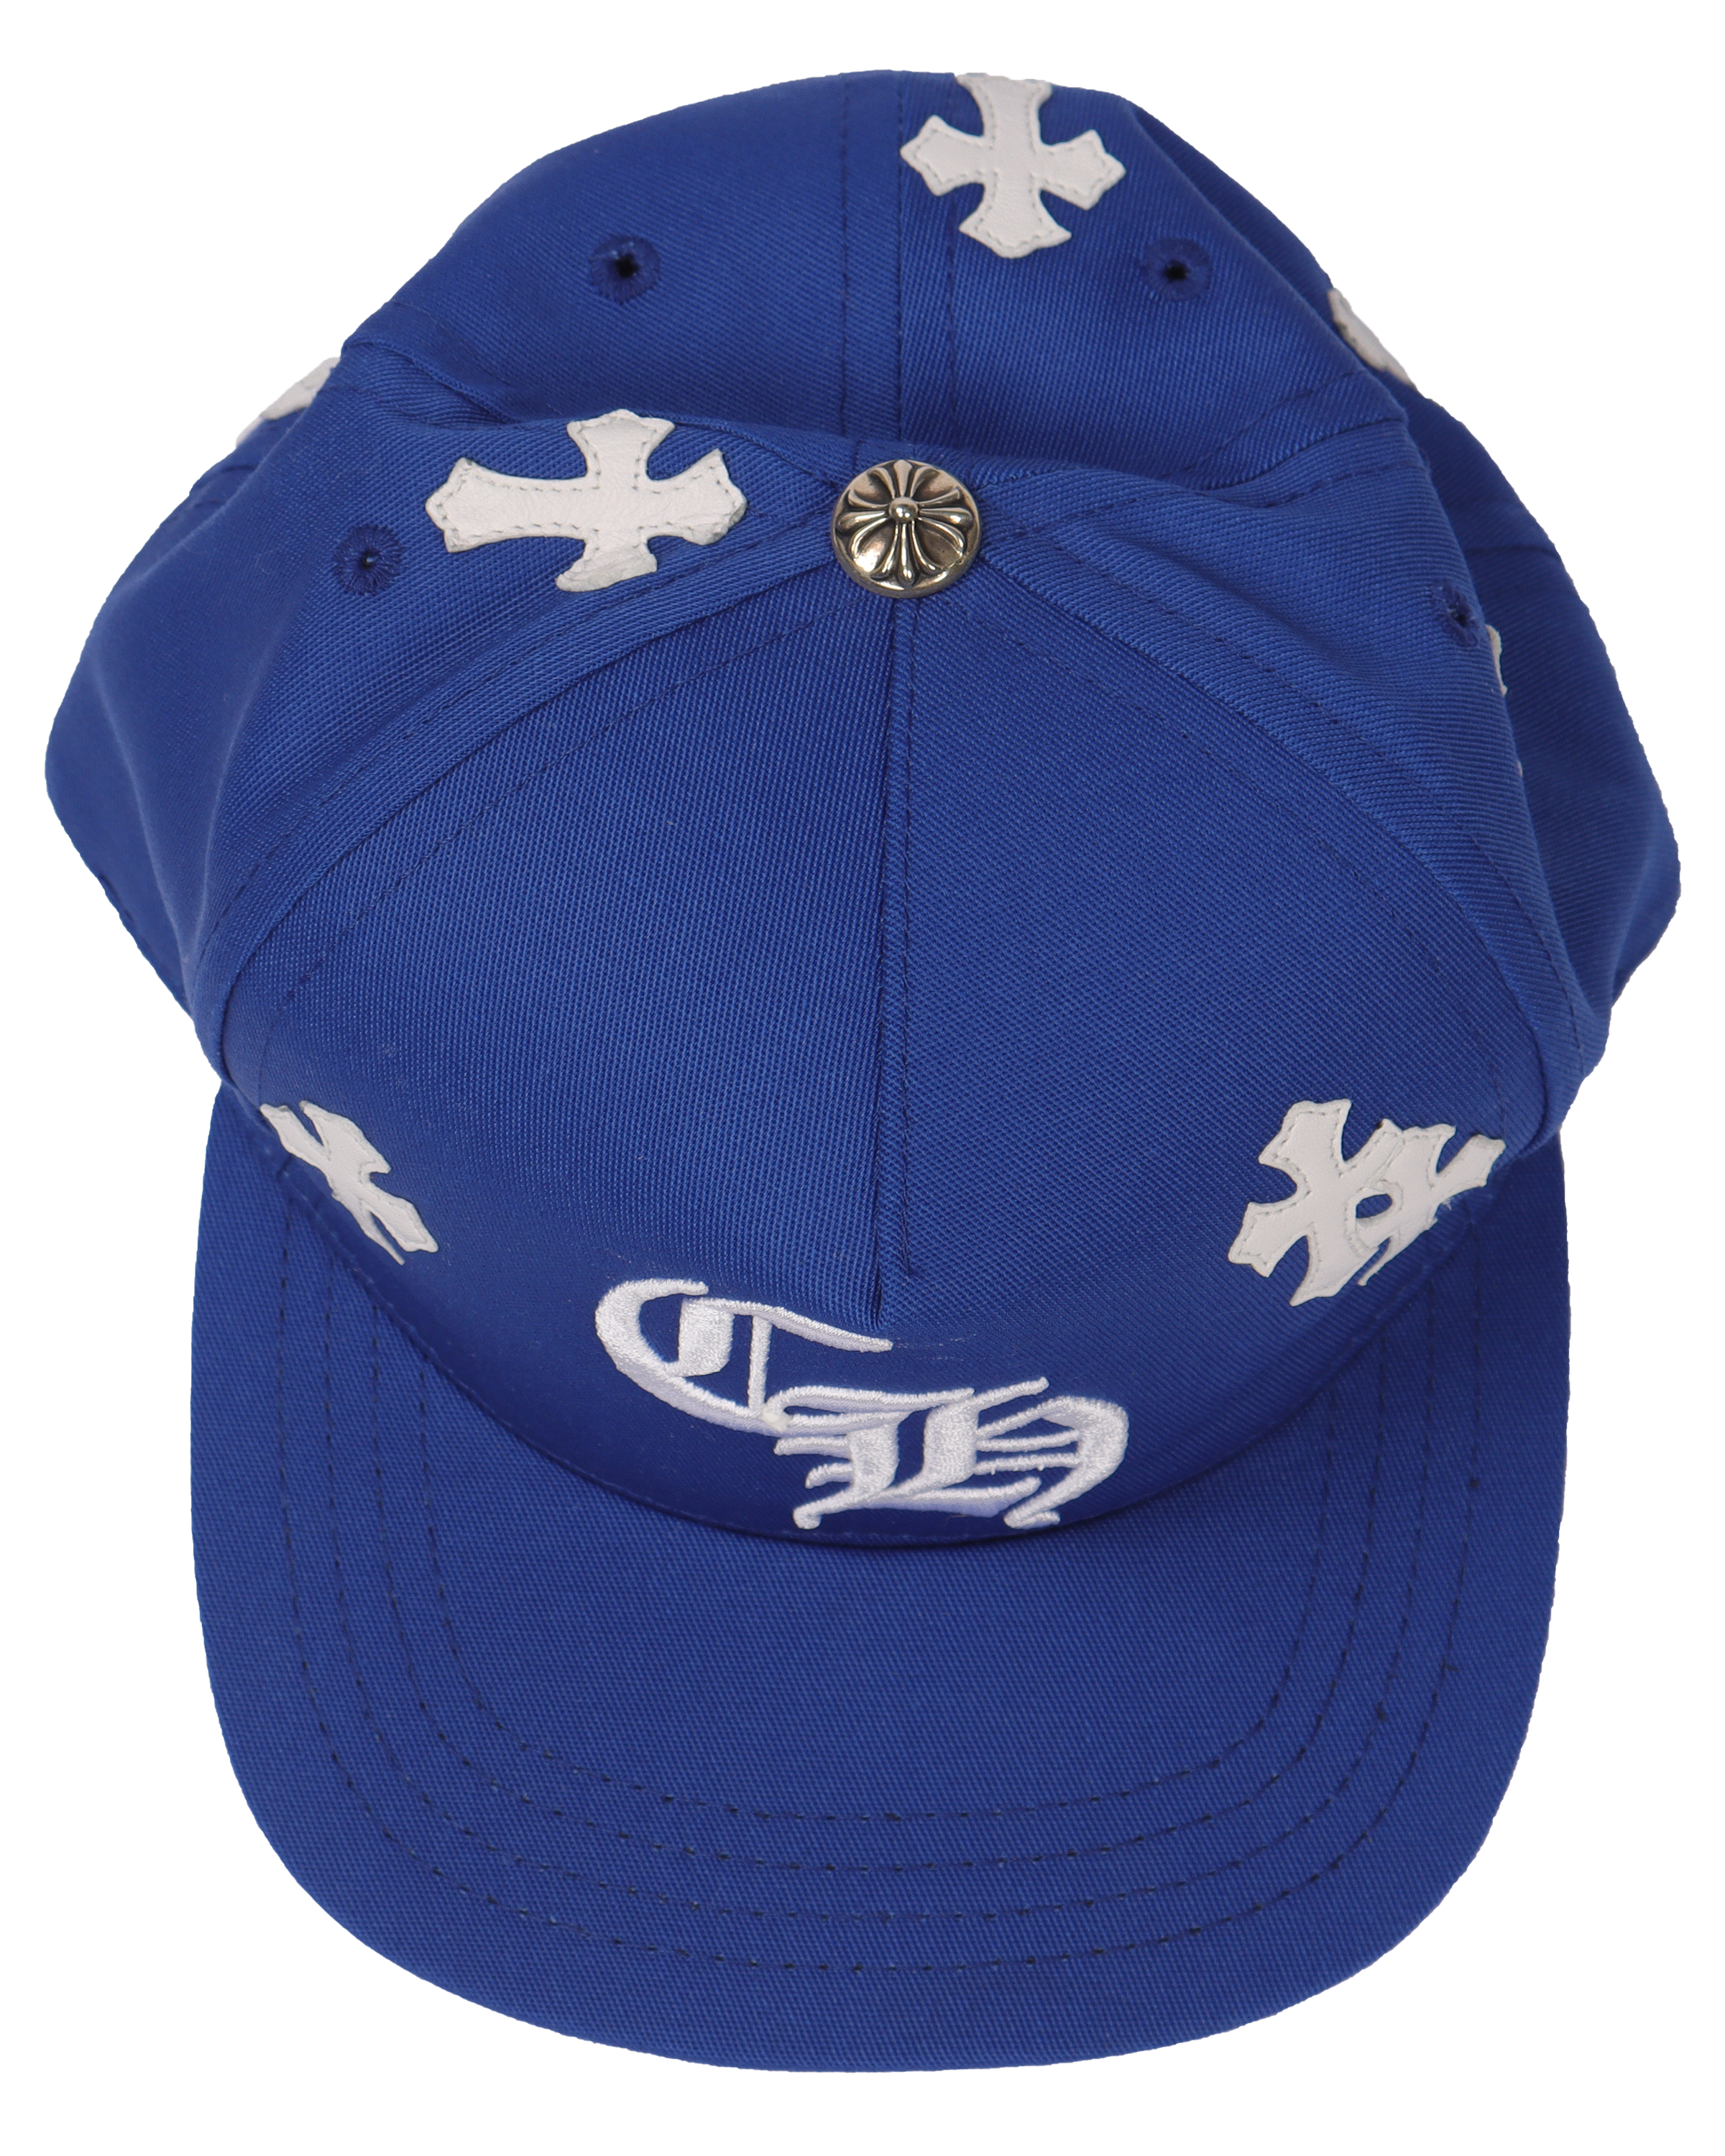 Embroidered Crosspatch Baseball Hat